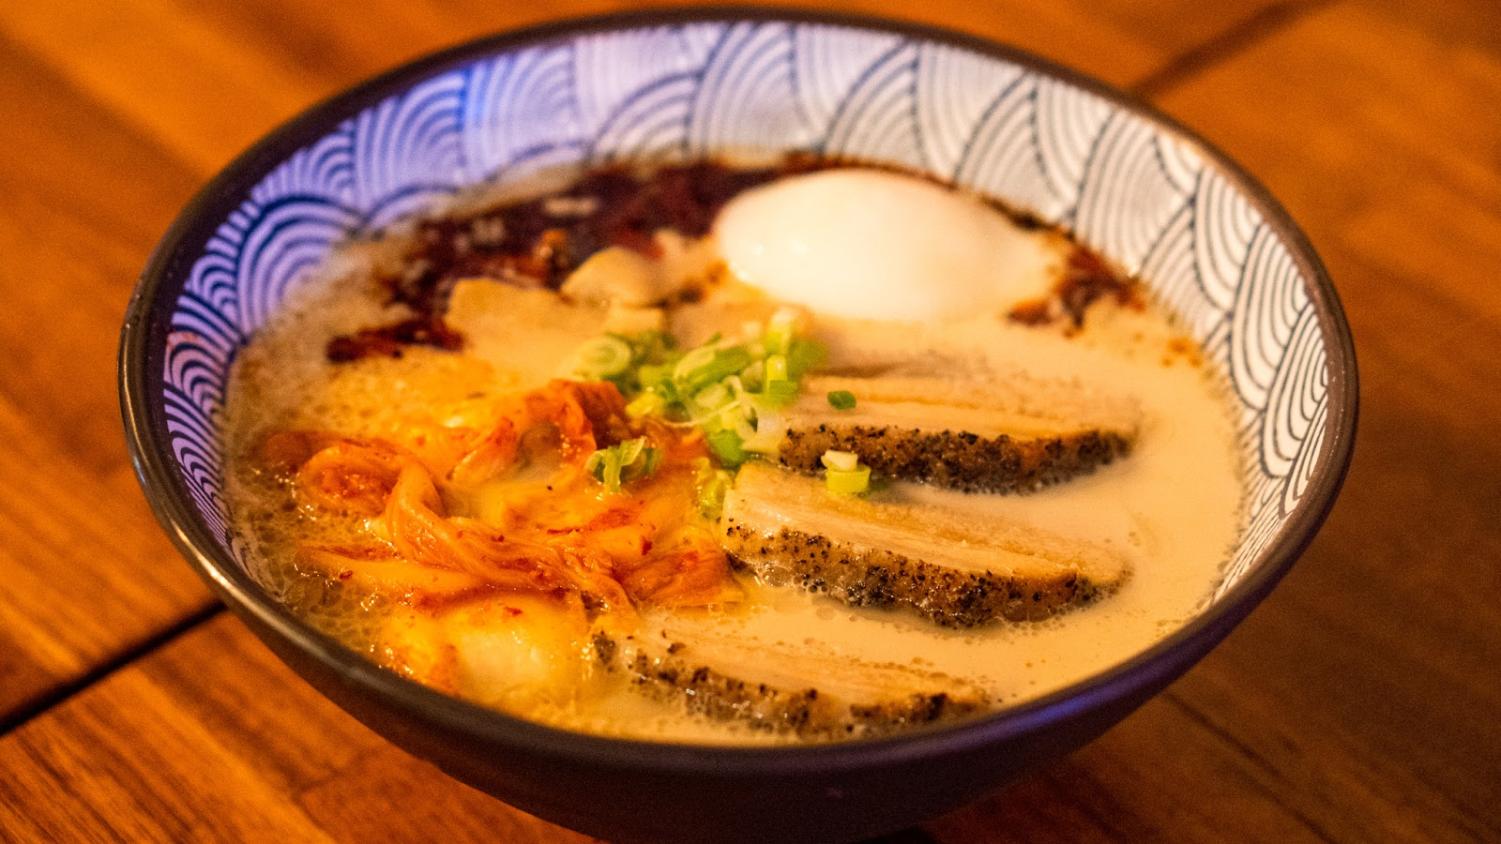 A bowl of ramen on a wooden table.